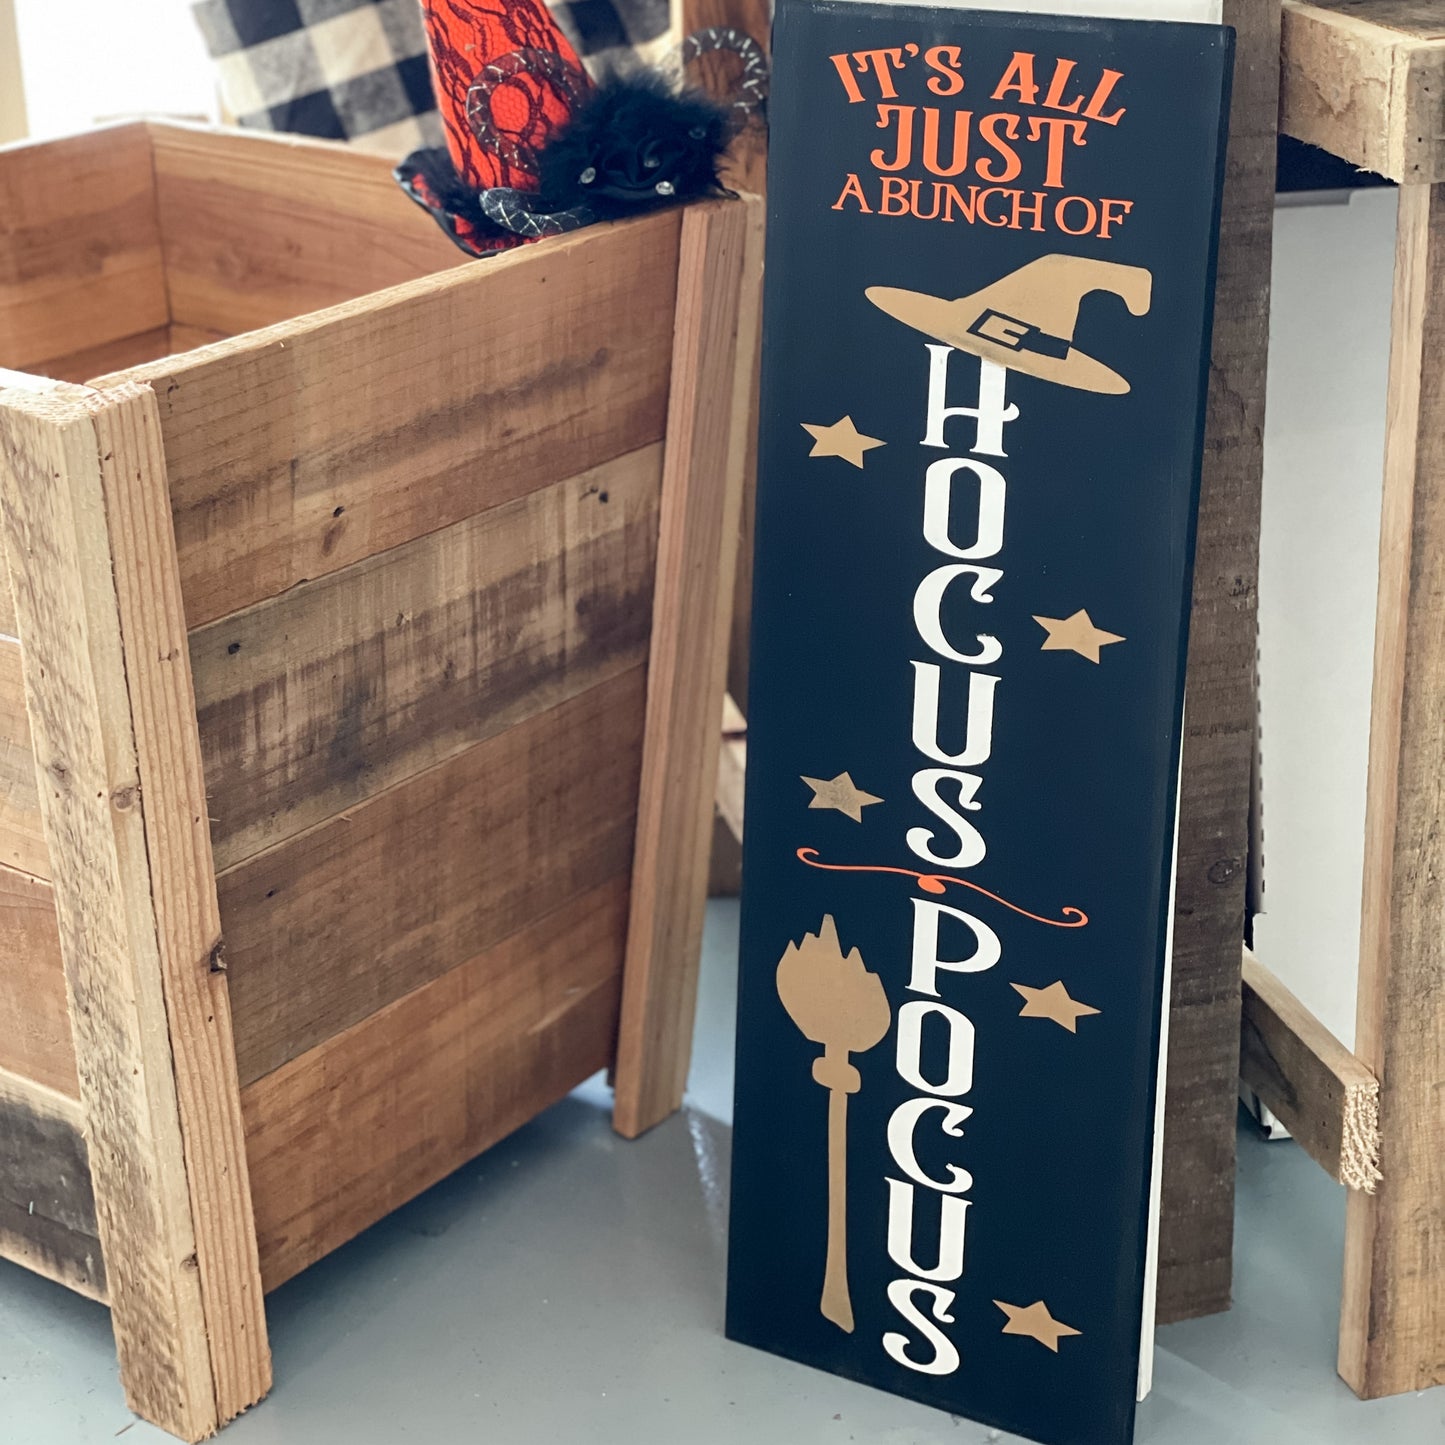 It's all just a bunch of Hocus Pocus with Witch Hat Plank Porch Sign Design P1797